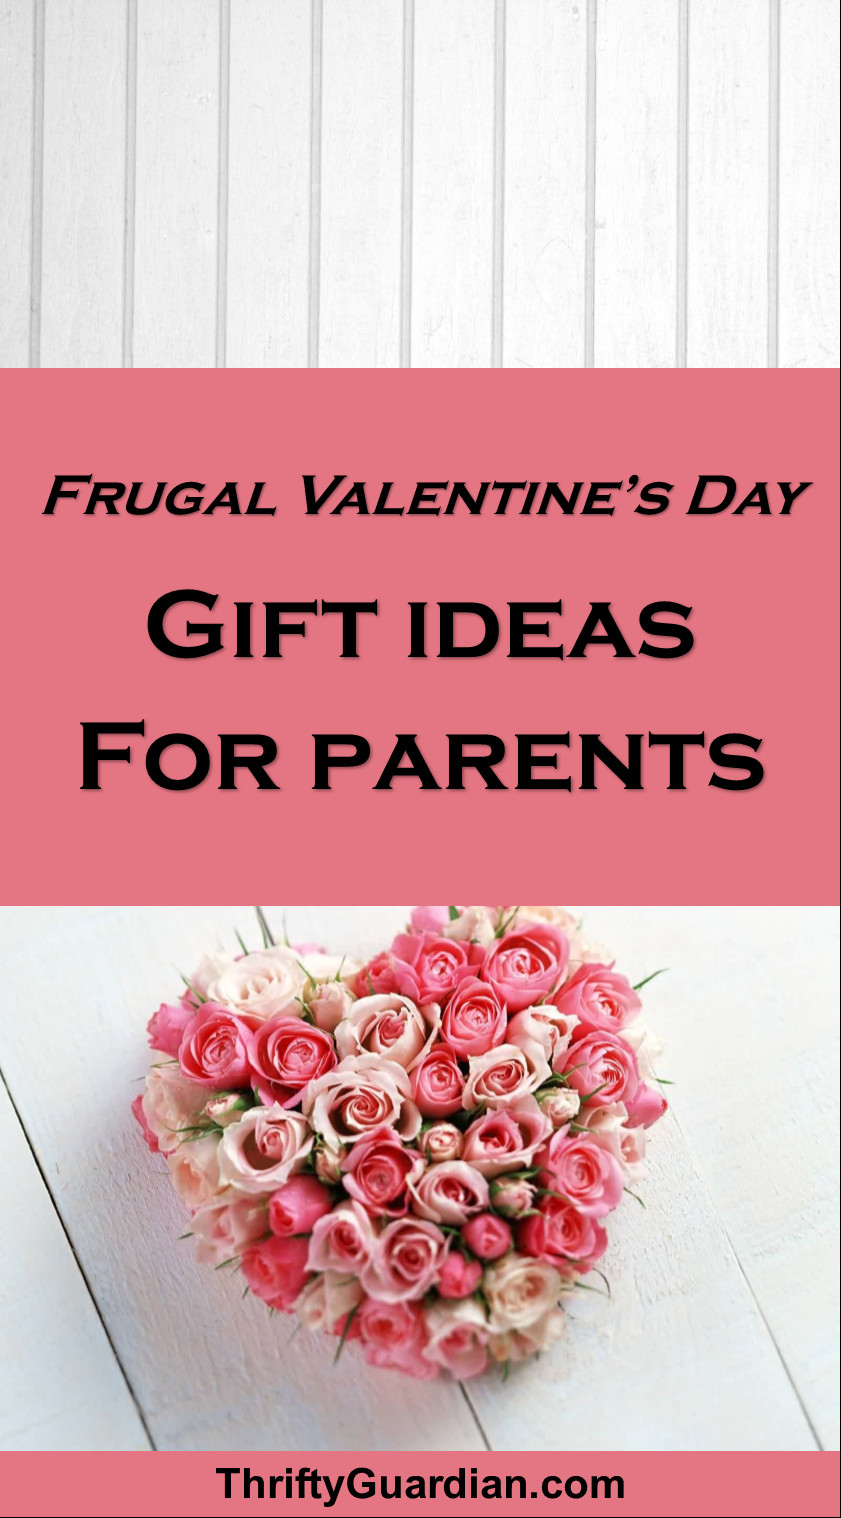 Valentines Gift Ideas For Mom
 12 Cheap but Thoughtful Gift Ideas for Parents